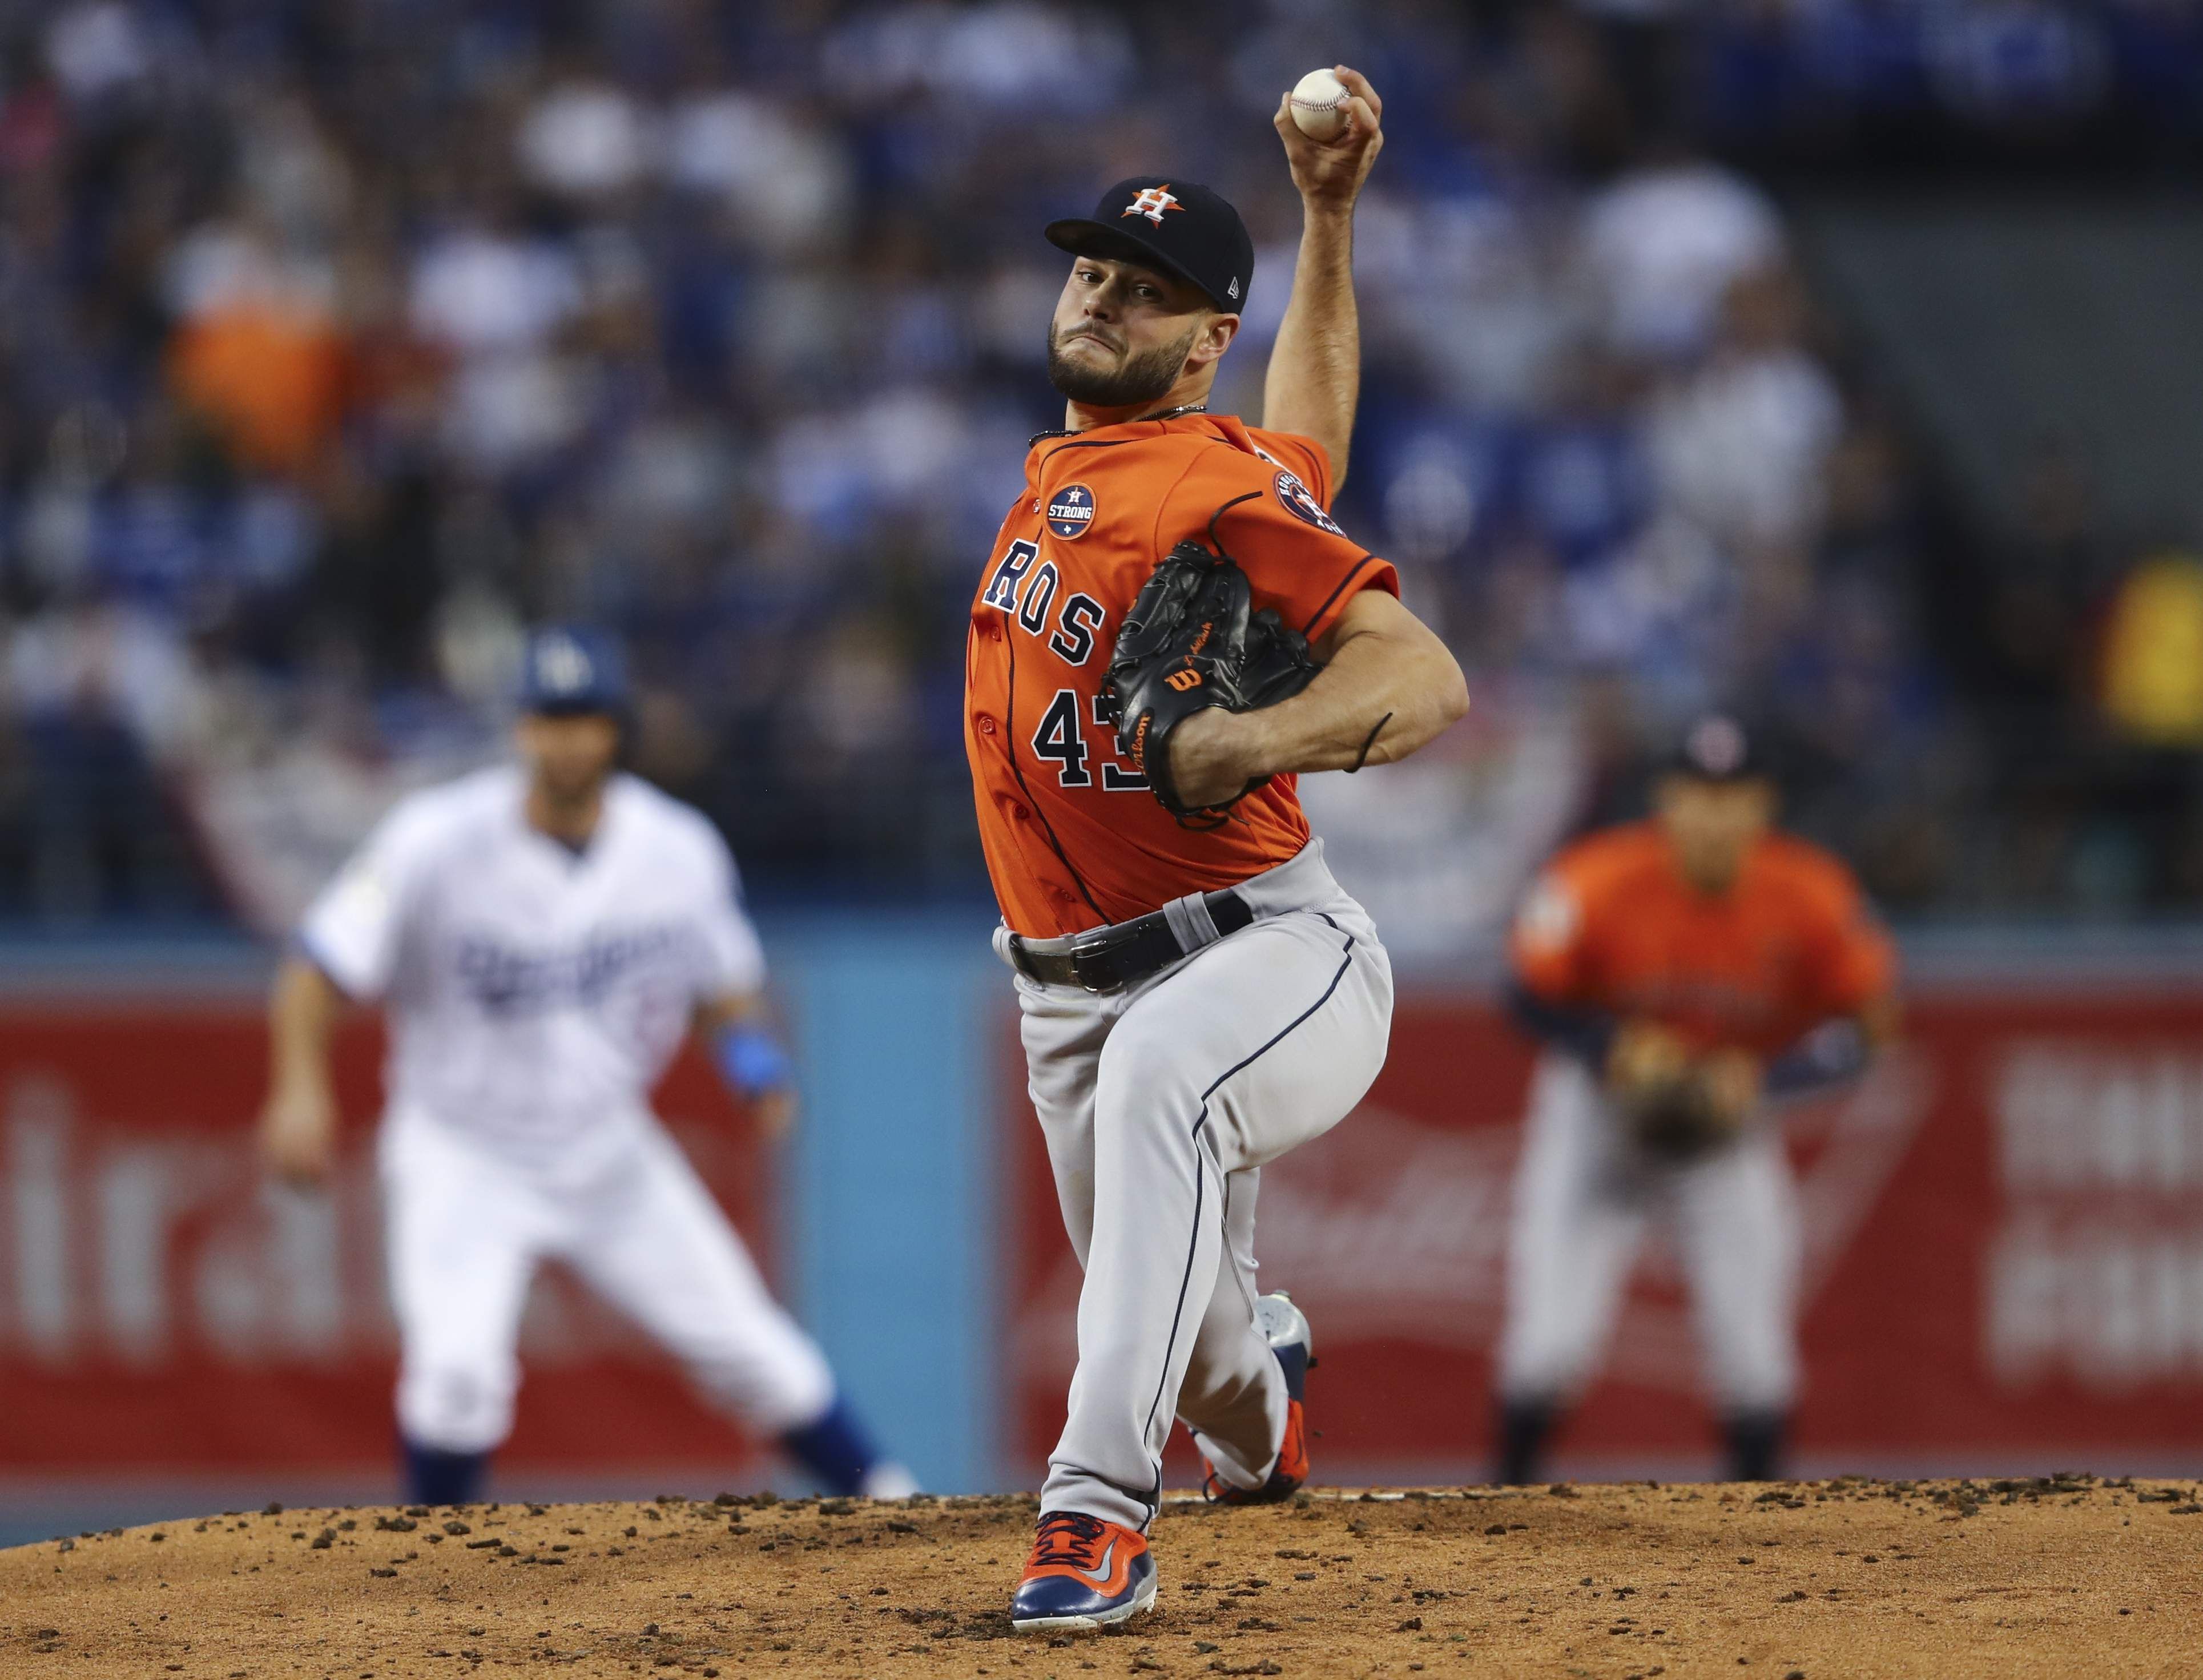 Tampa's Lance McCullers shows killer instinct in pitching Astros